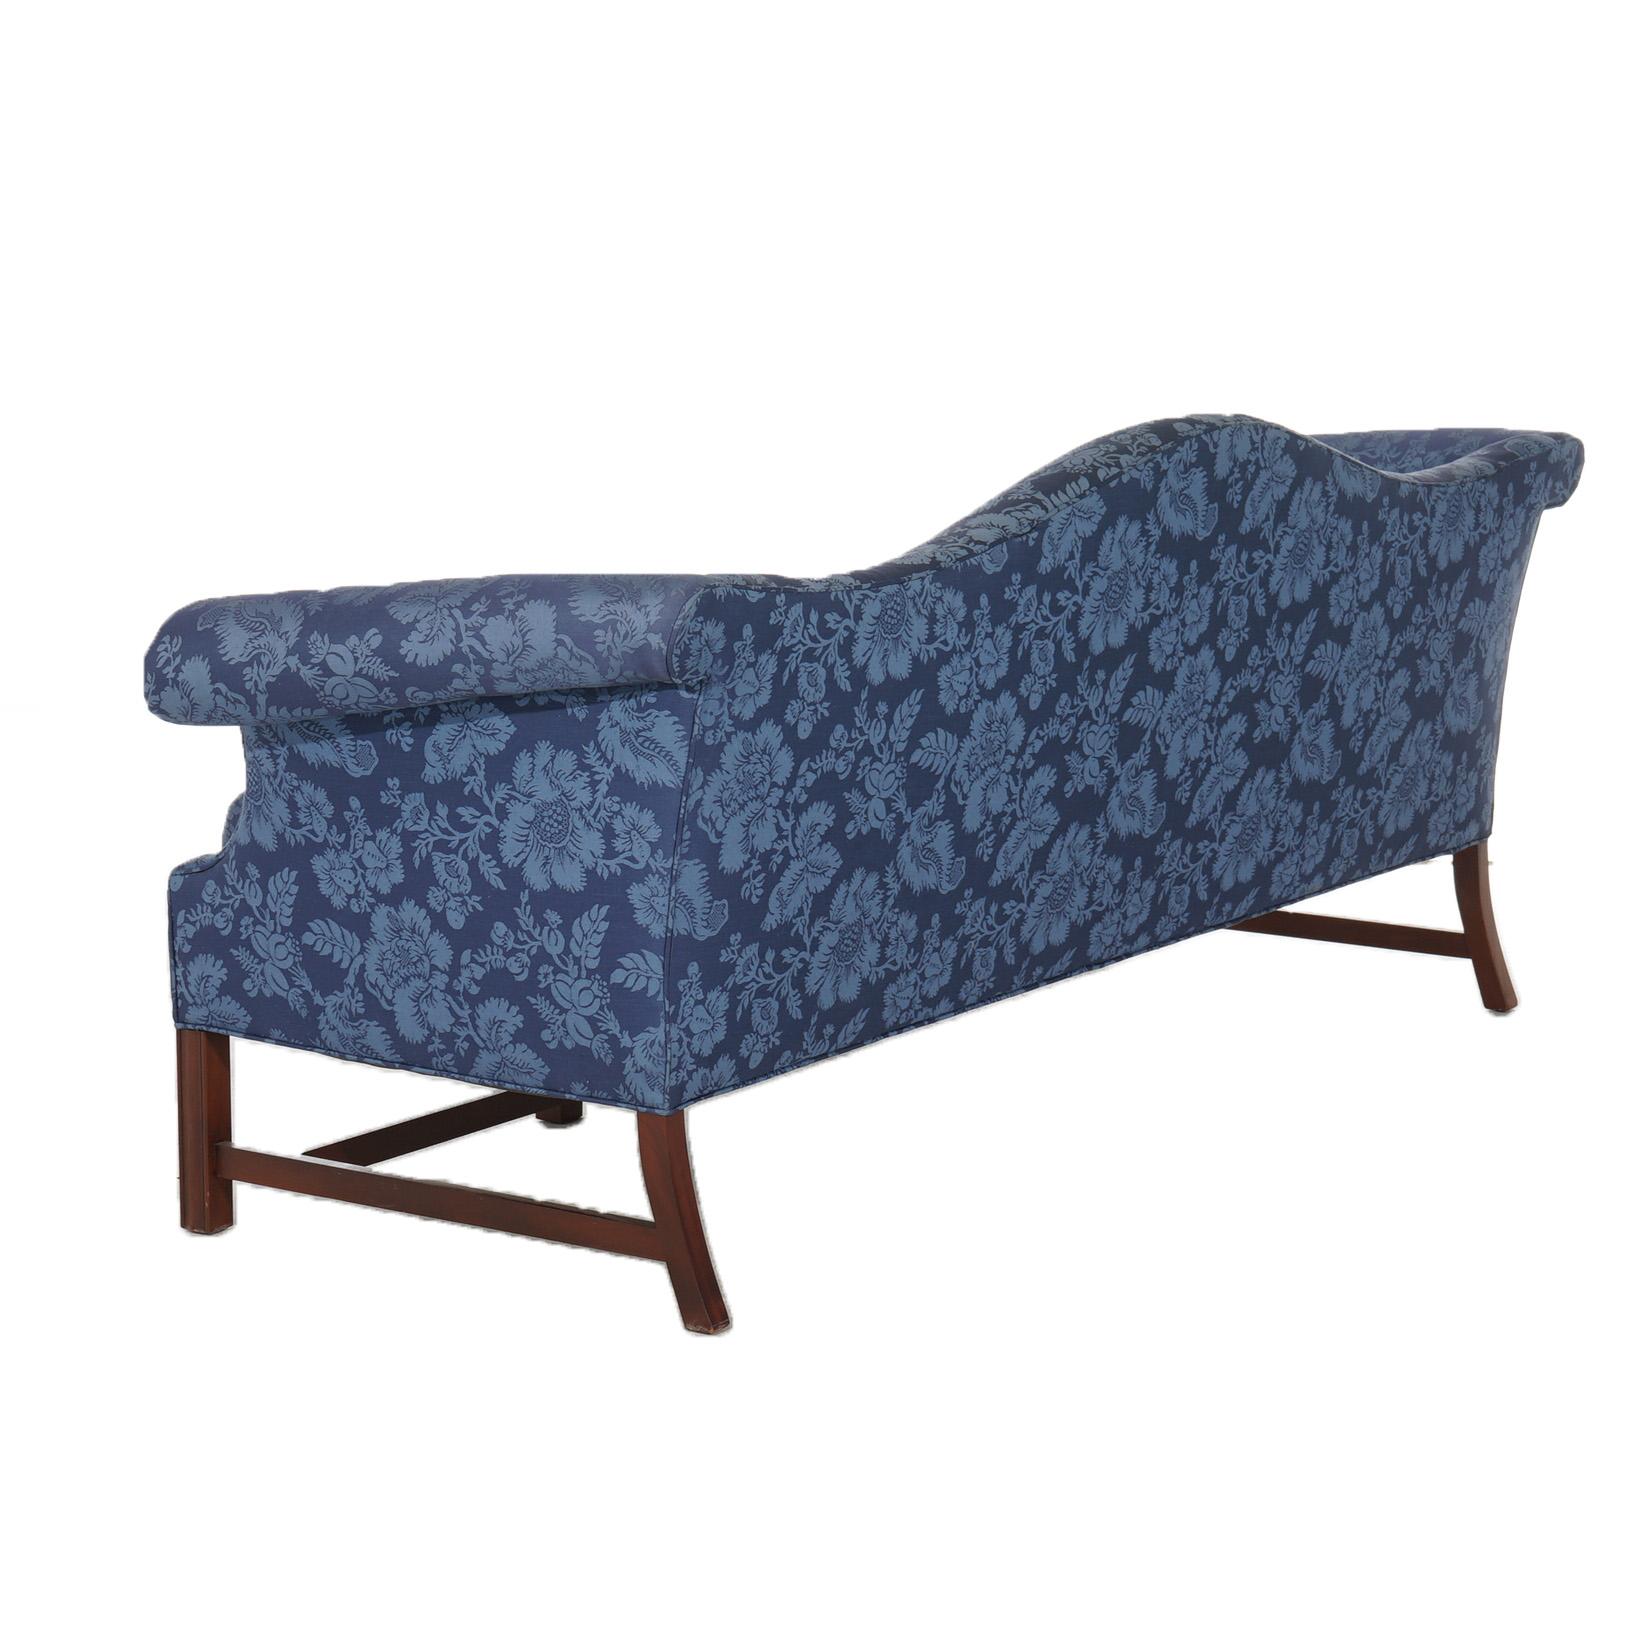 Antique Chippendale Camelback Sofa with Scroll Arms, Blue, C1930 2